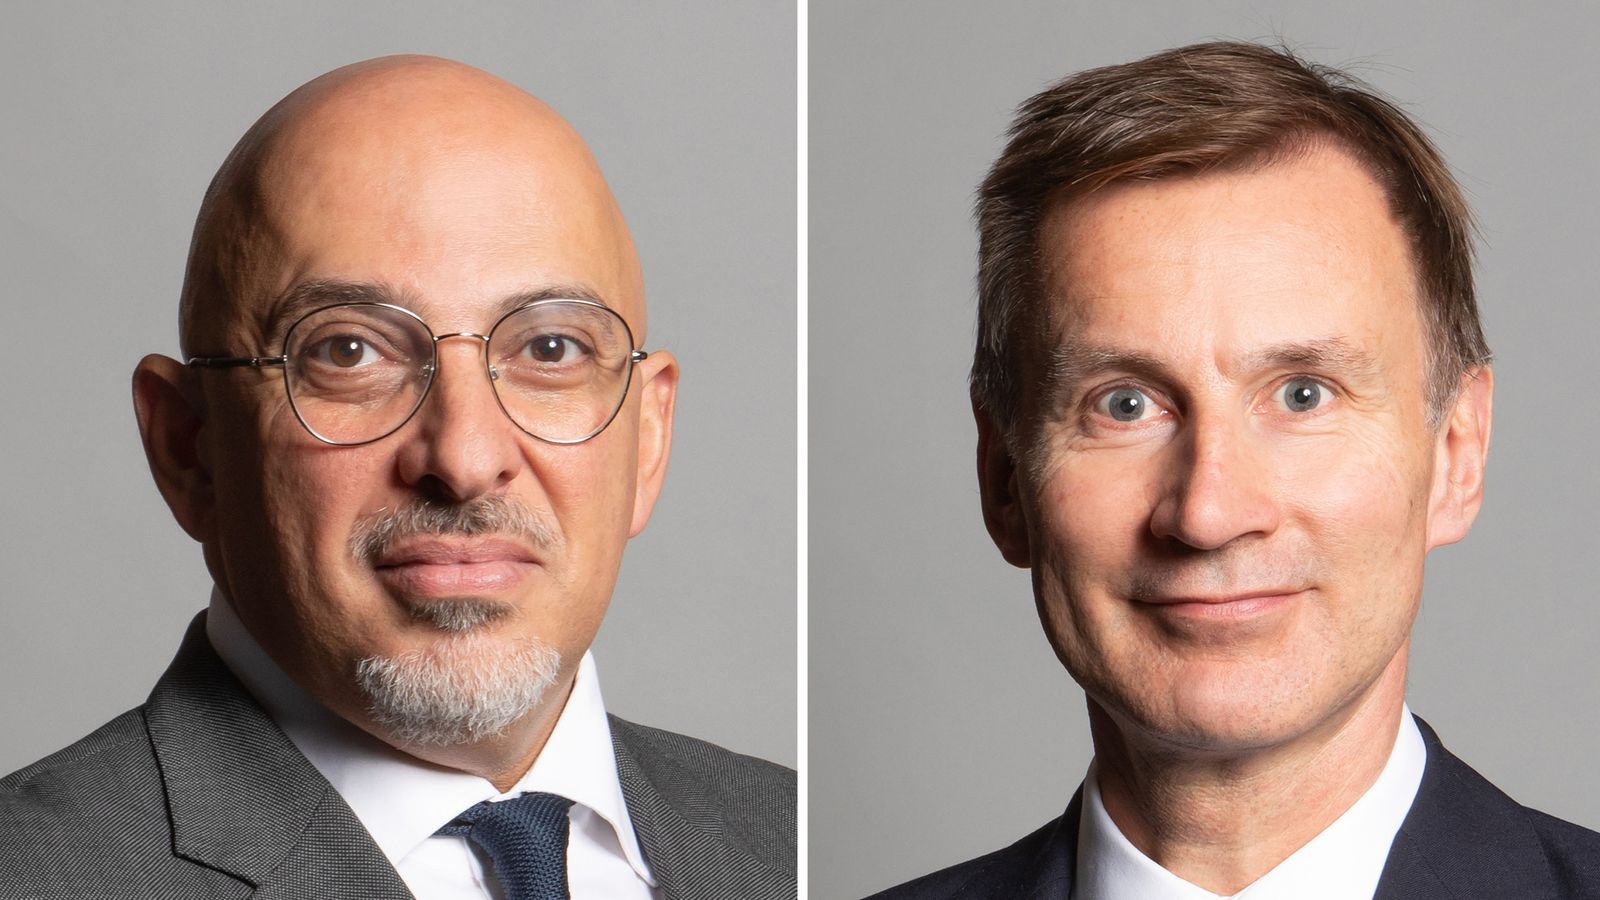 Nadhim Zahawi and Jeremy Hunt knocked out of Tory leadership race after first round of voting |  PoliticsNews